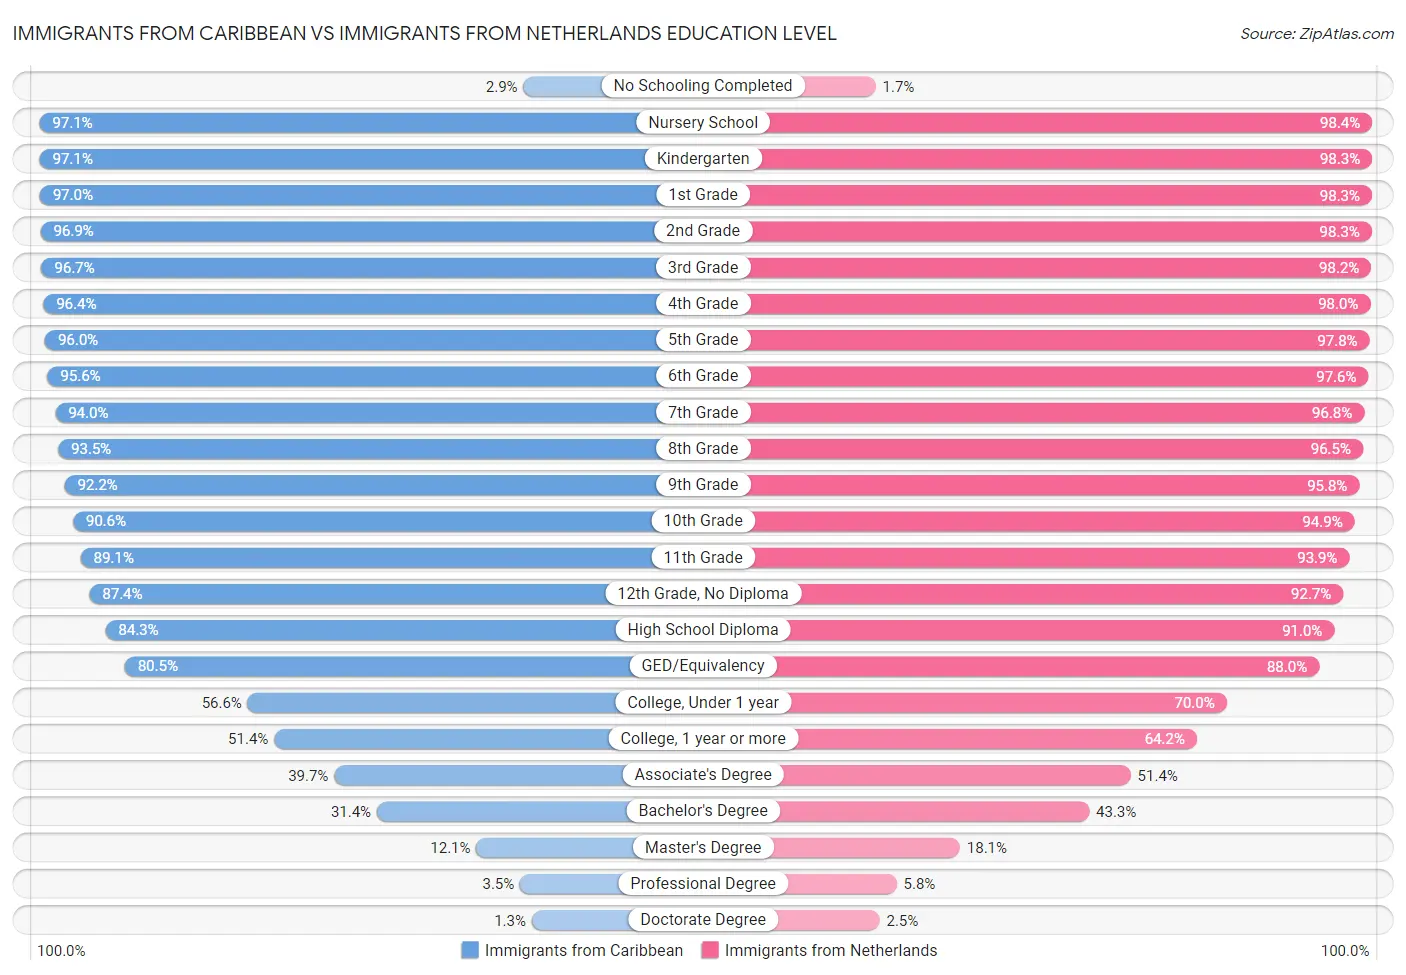 Immigrants from Caribbean vs Immigrants from Netherlands Education Level